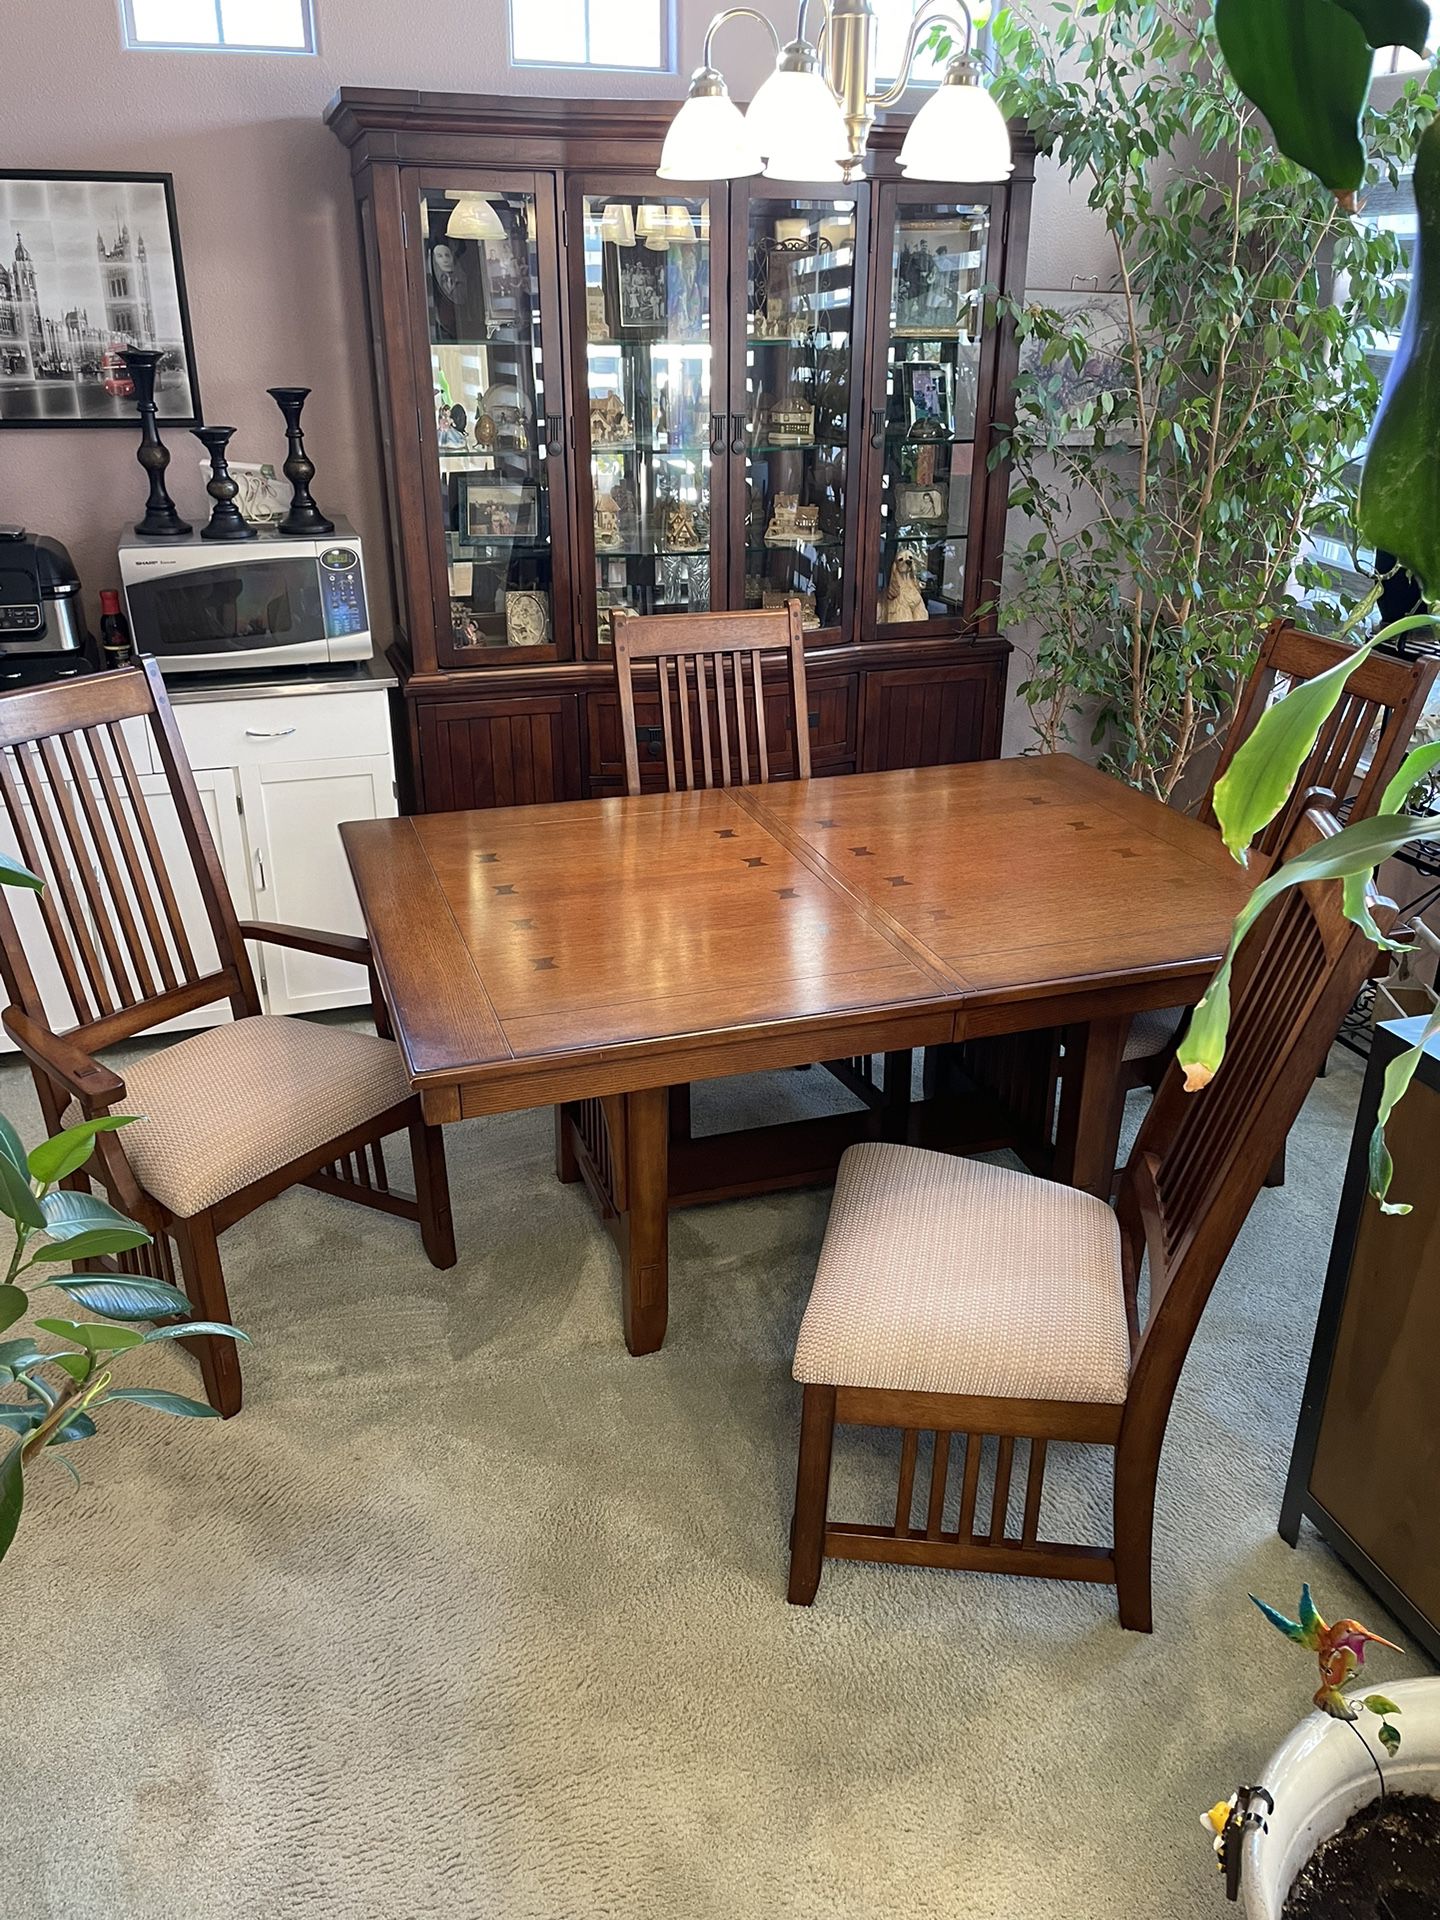 Dining Room Table With 4 Chairs - MUST SELL